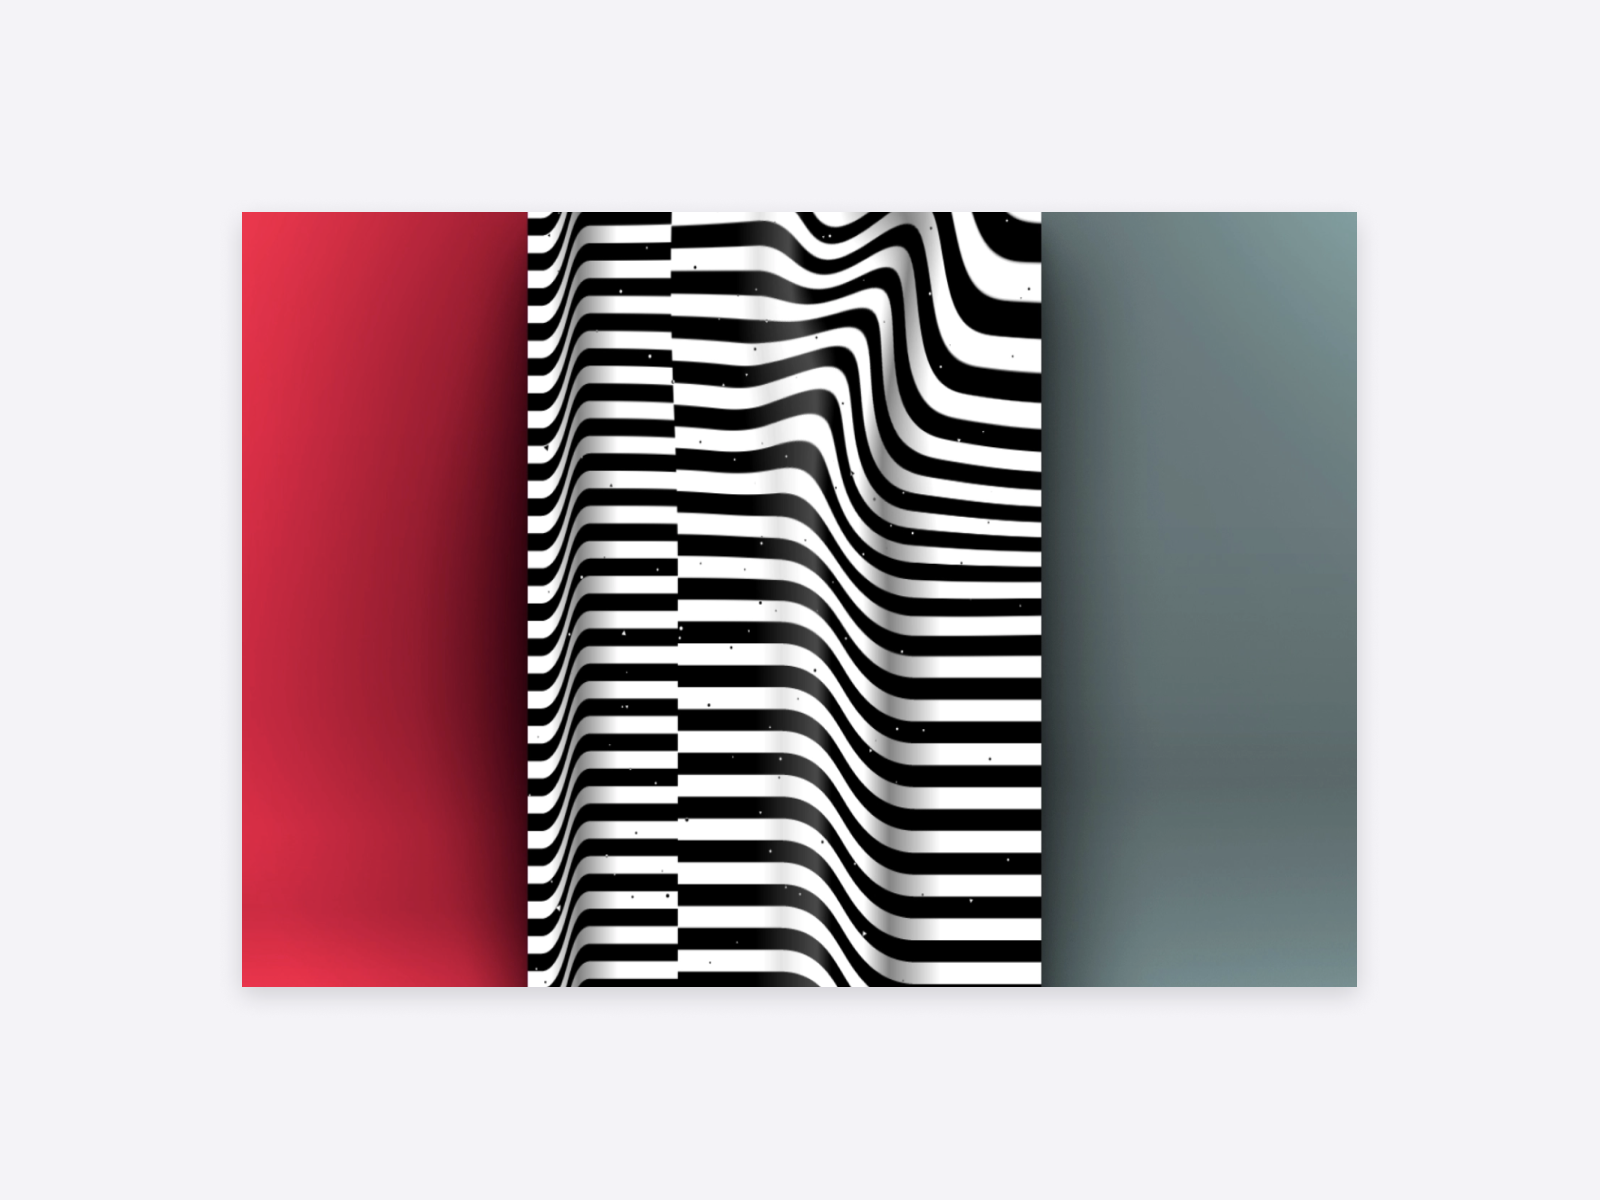 Black and white parametric patterns, with grey and red